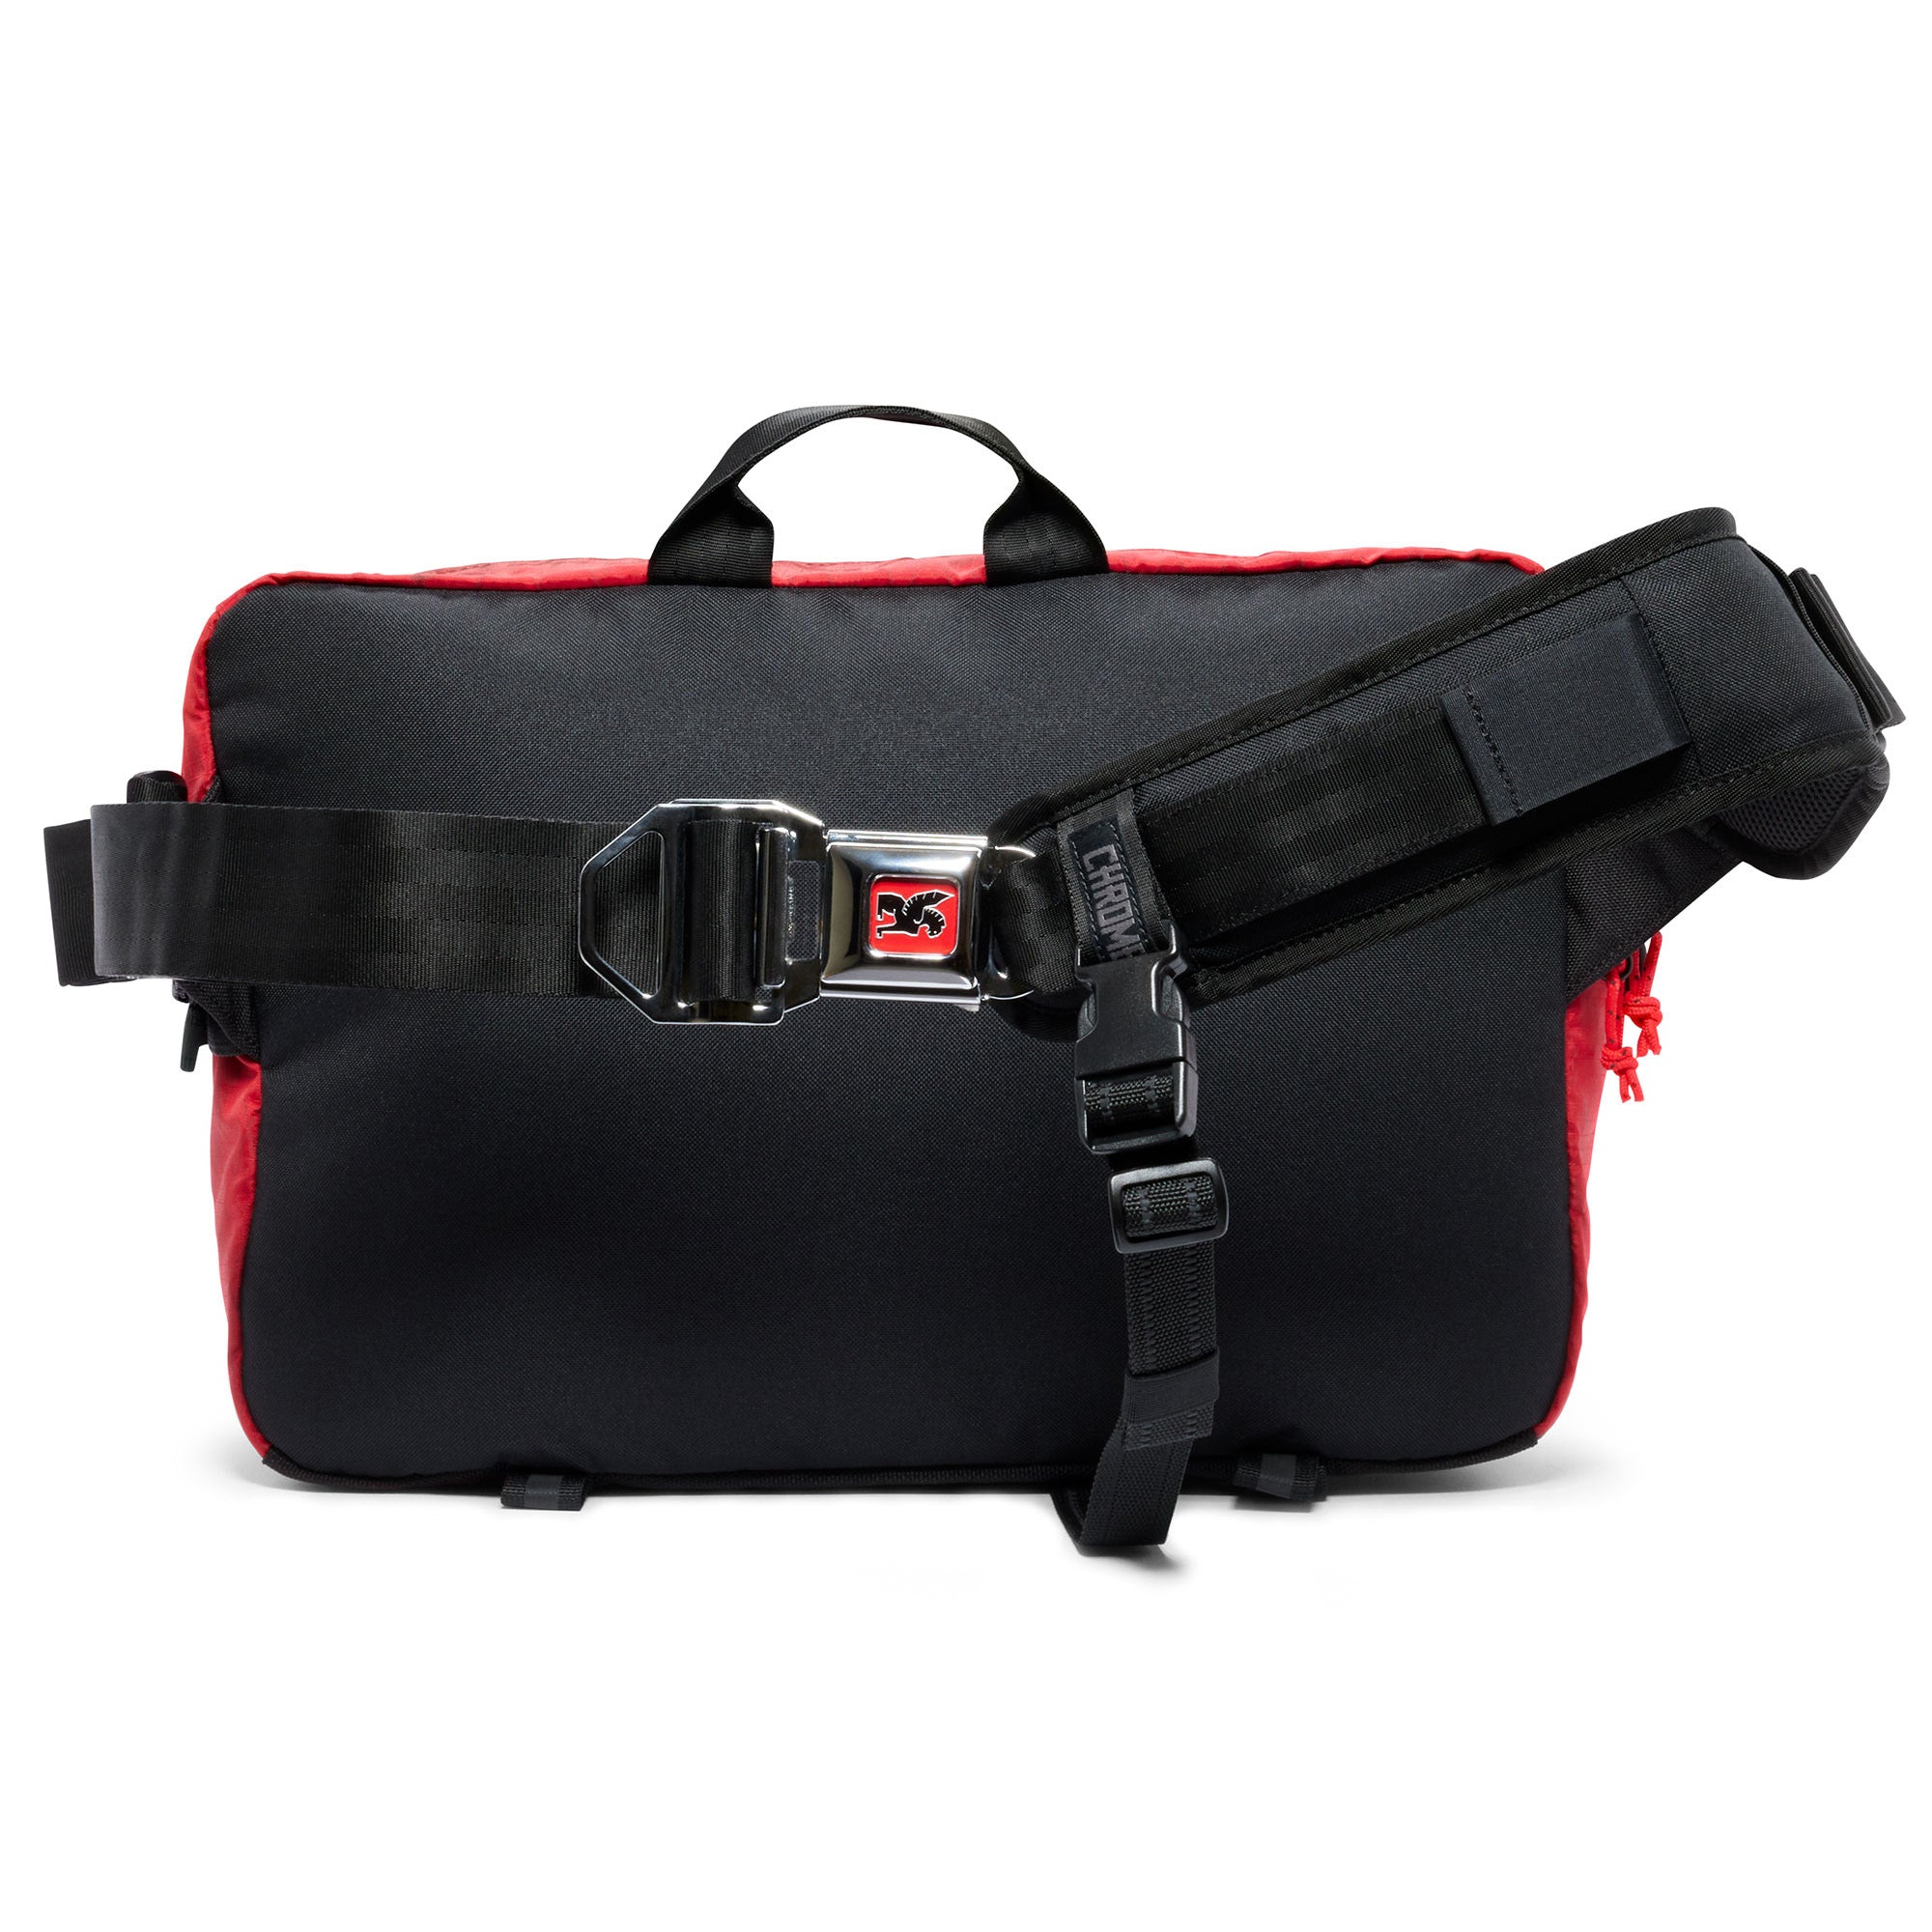 15L sling Kadet Max in red X fabric strap view #color_red x